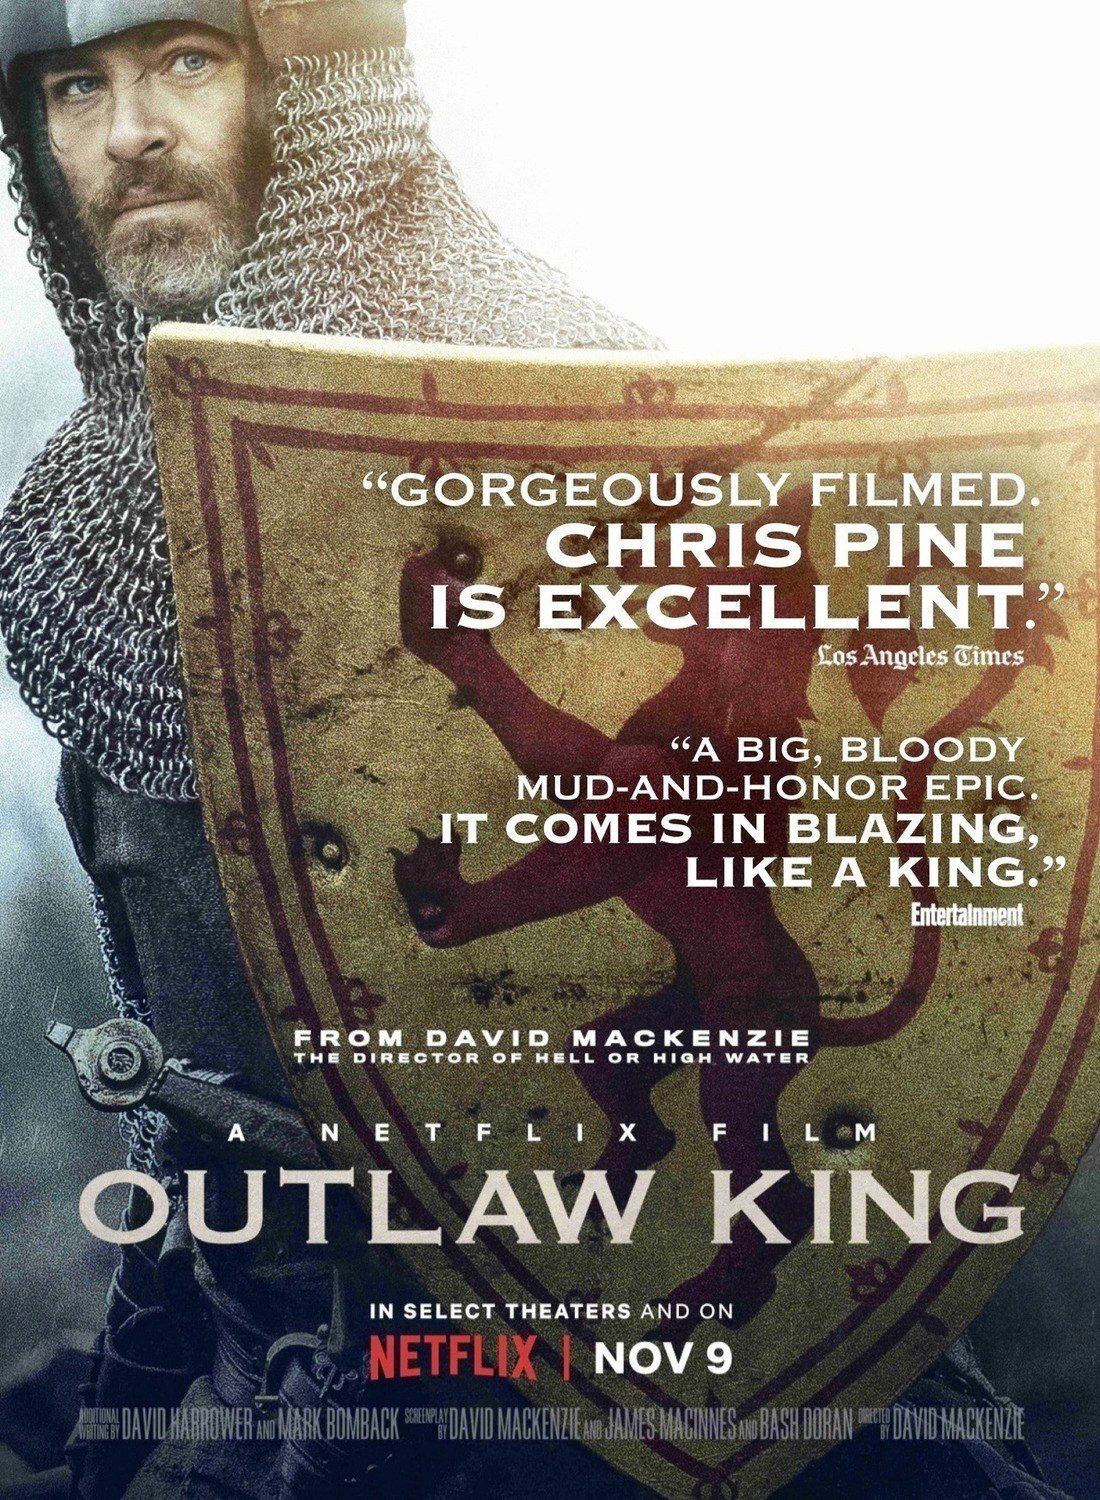 Poster of Netflix's Outlaw King (2018)